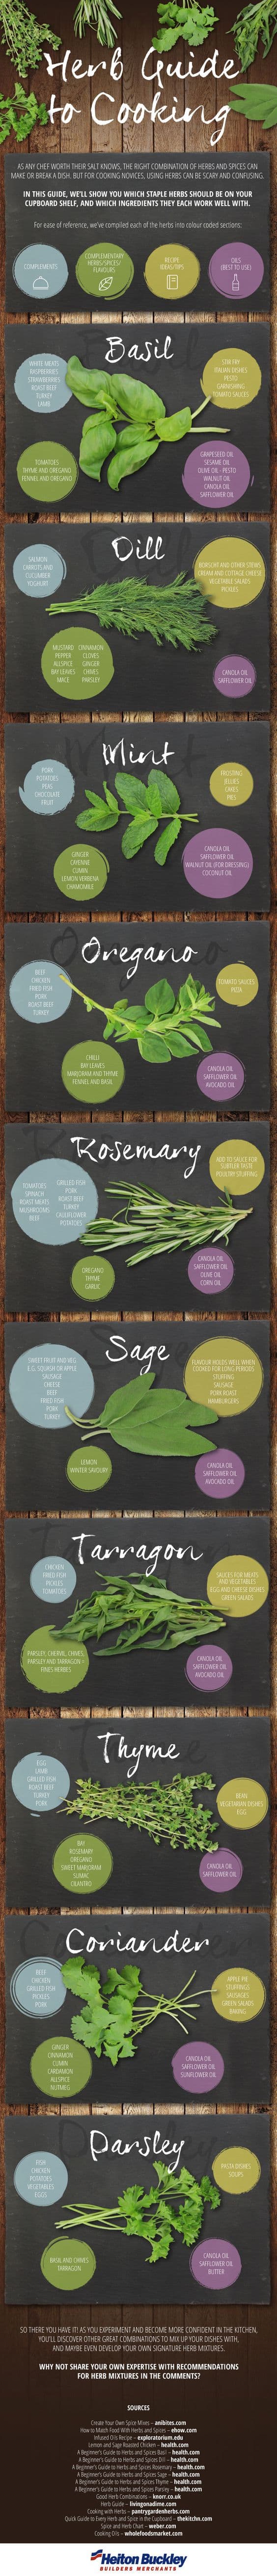 Guide to Using Herbs To Cook Delicious Healthy Meals